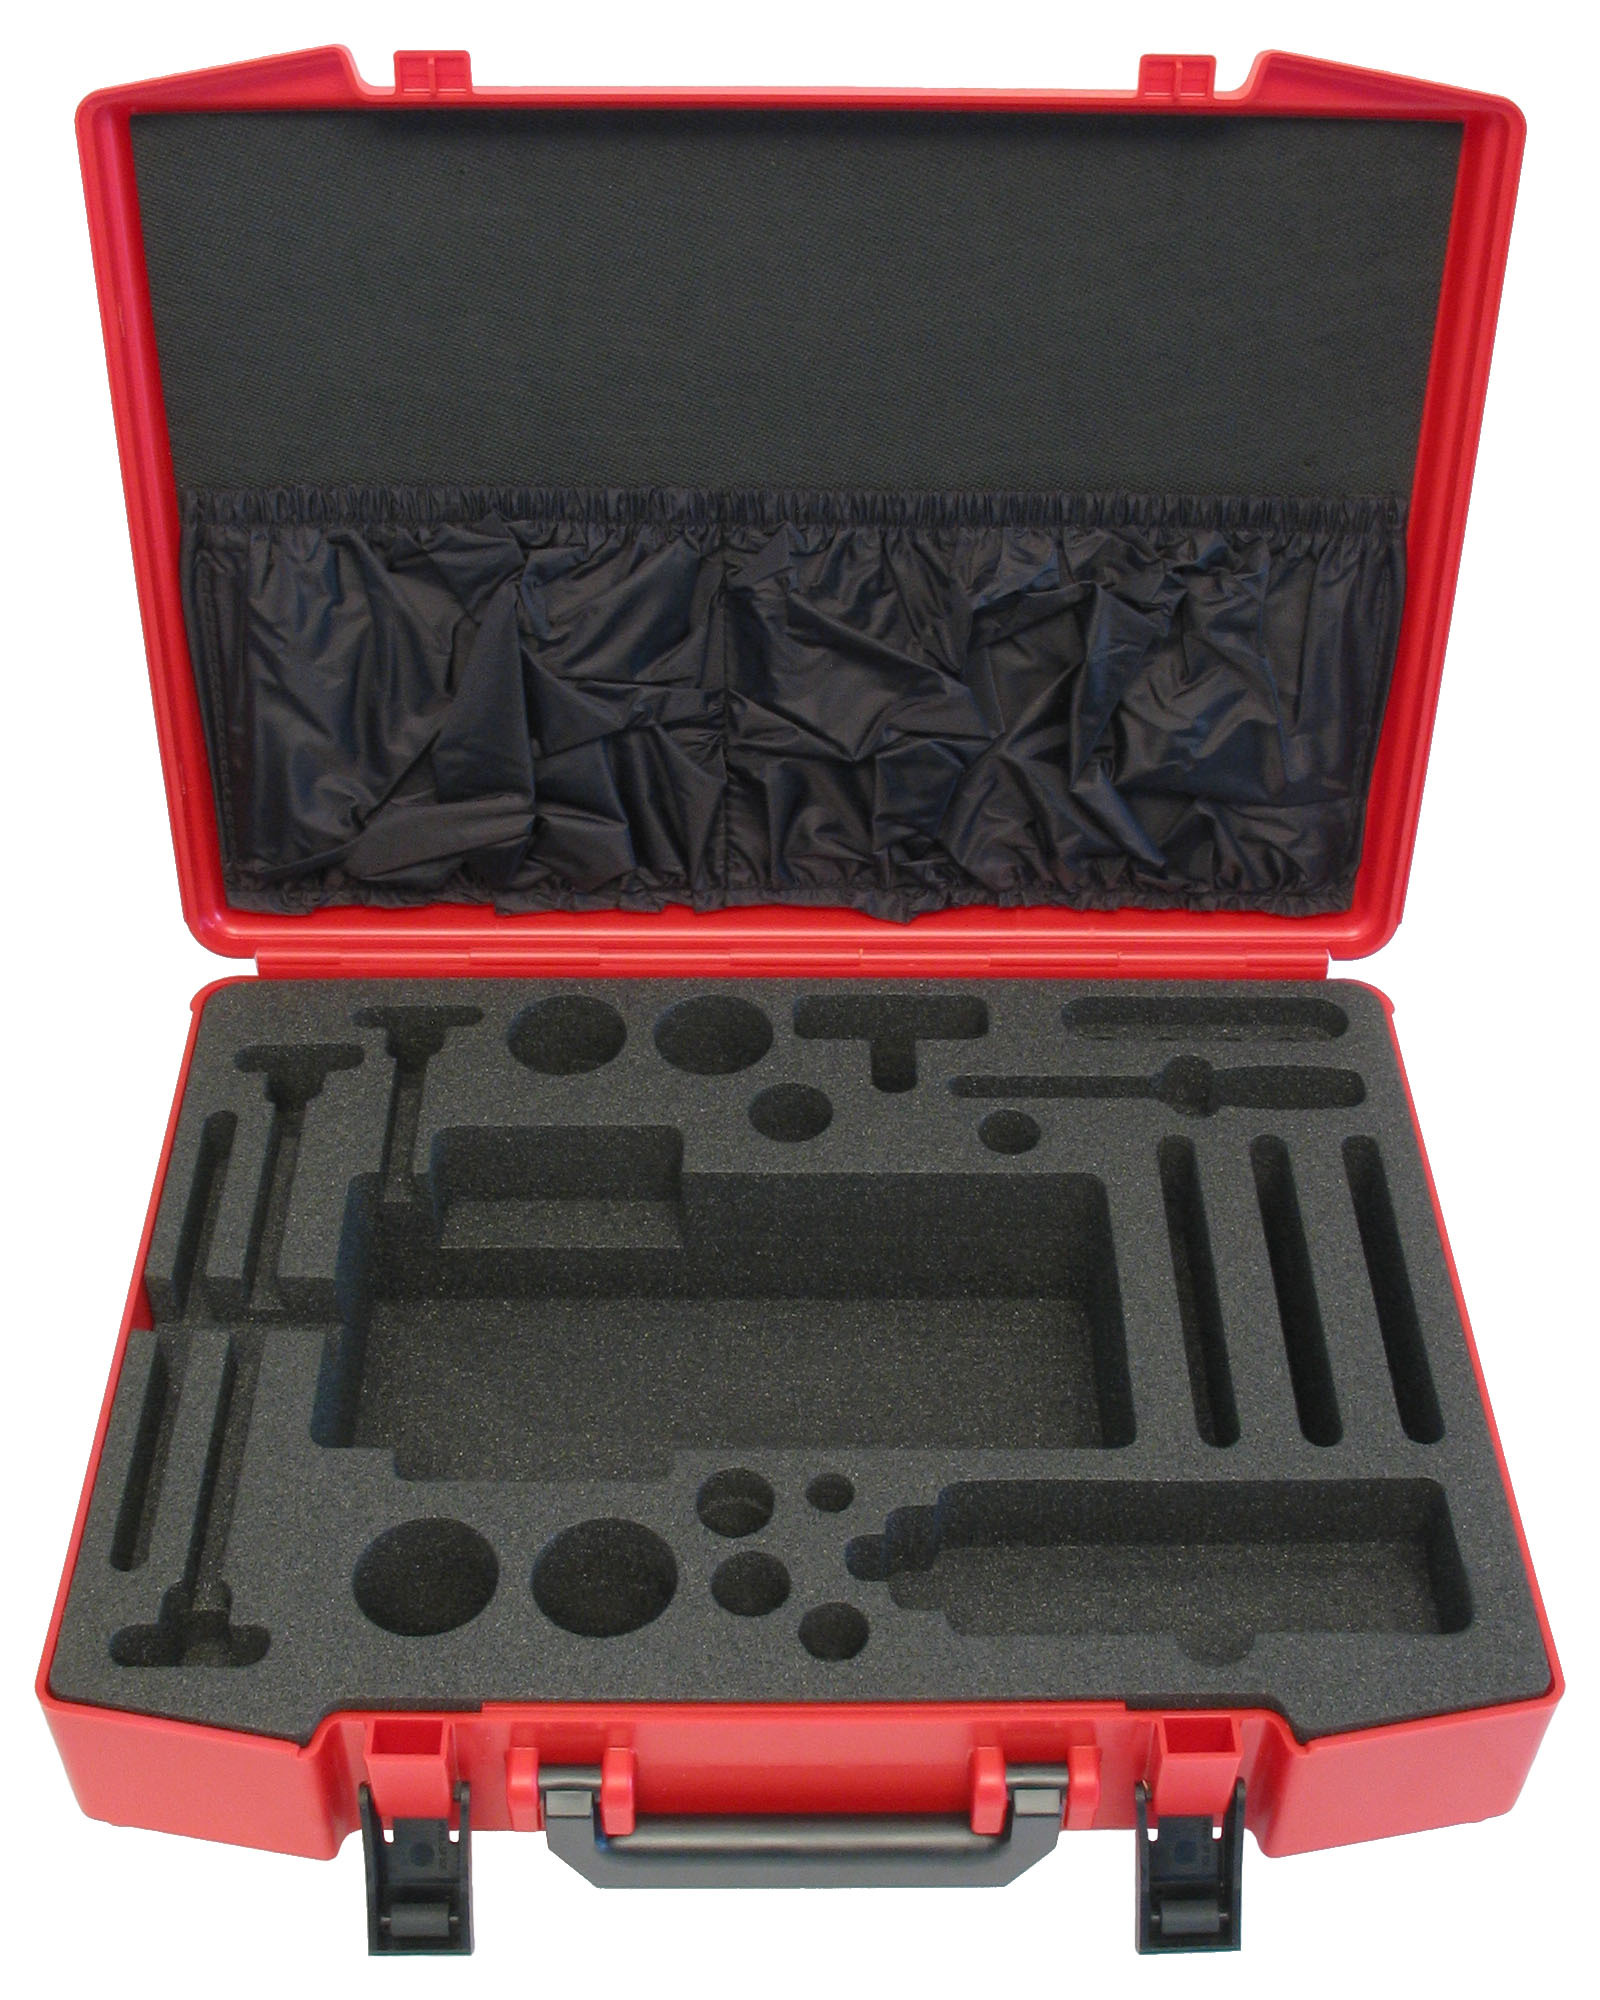 Case with foam insert for GVT